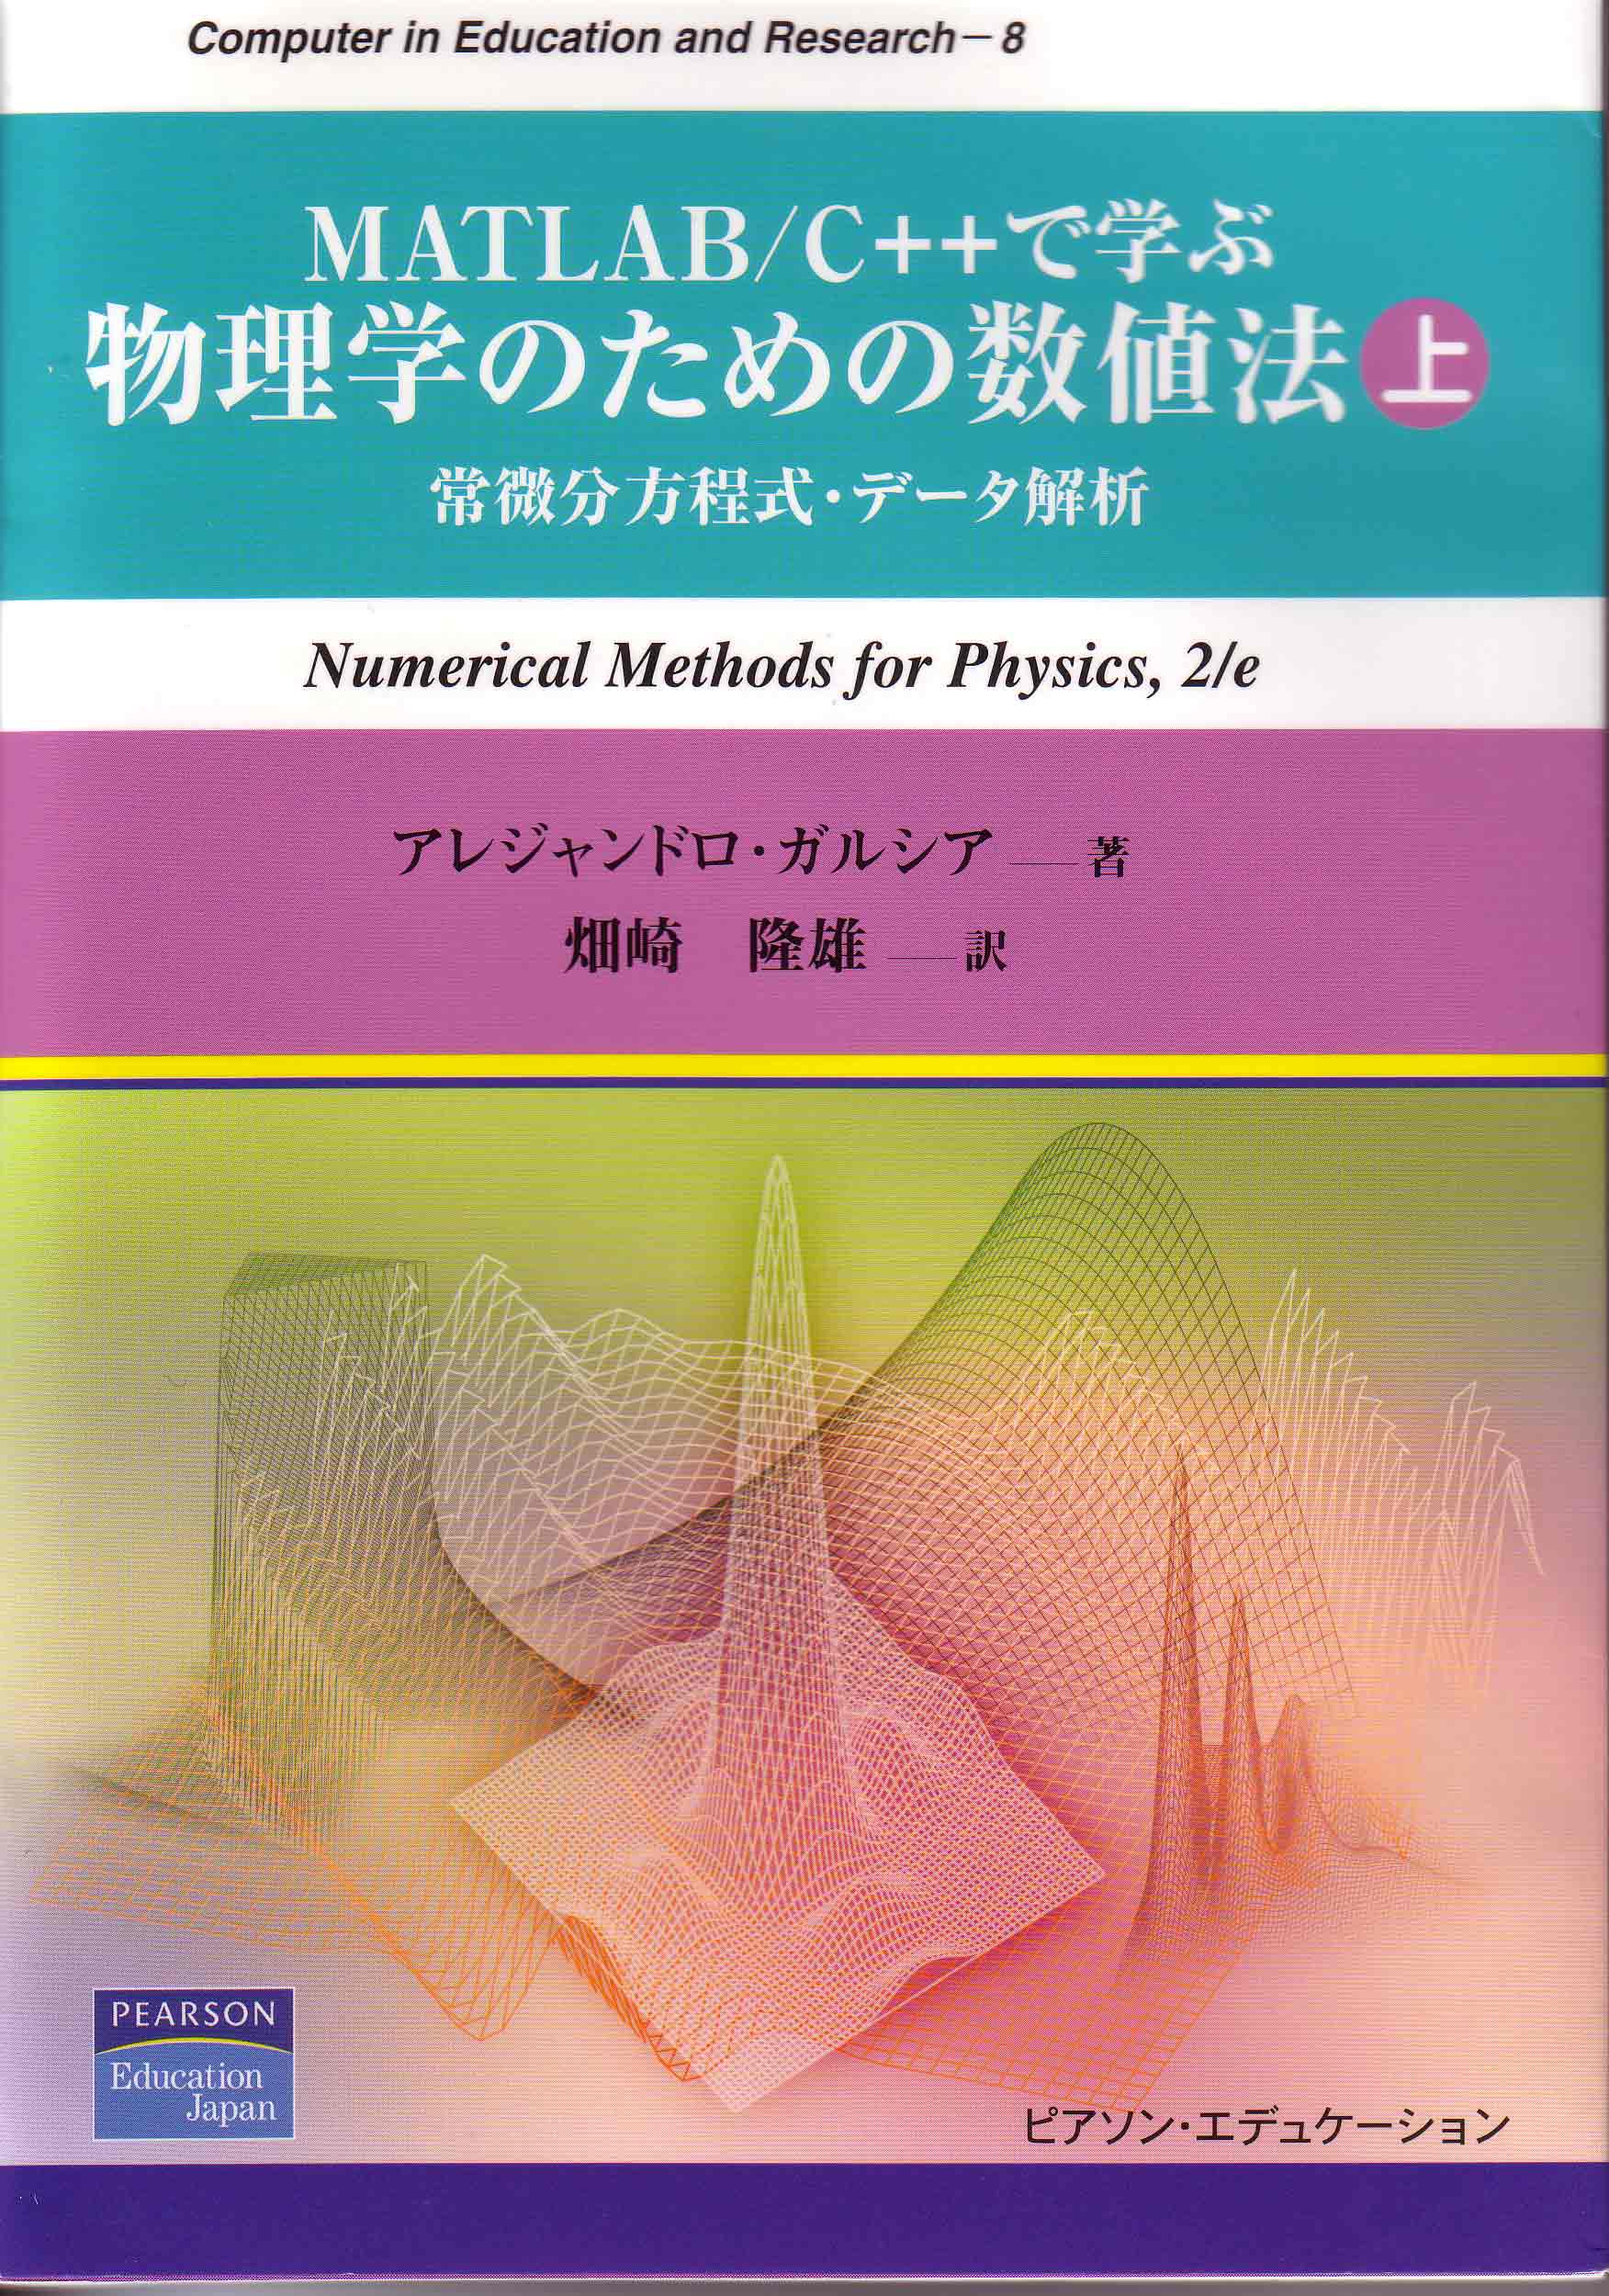 Picture of the Japanese edition's cover